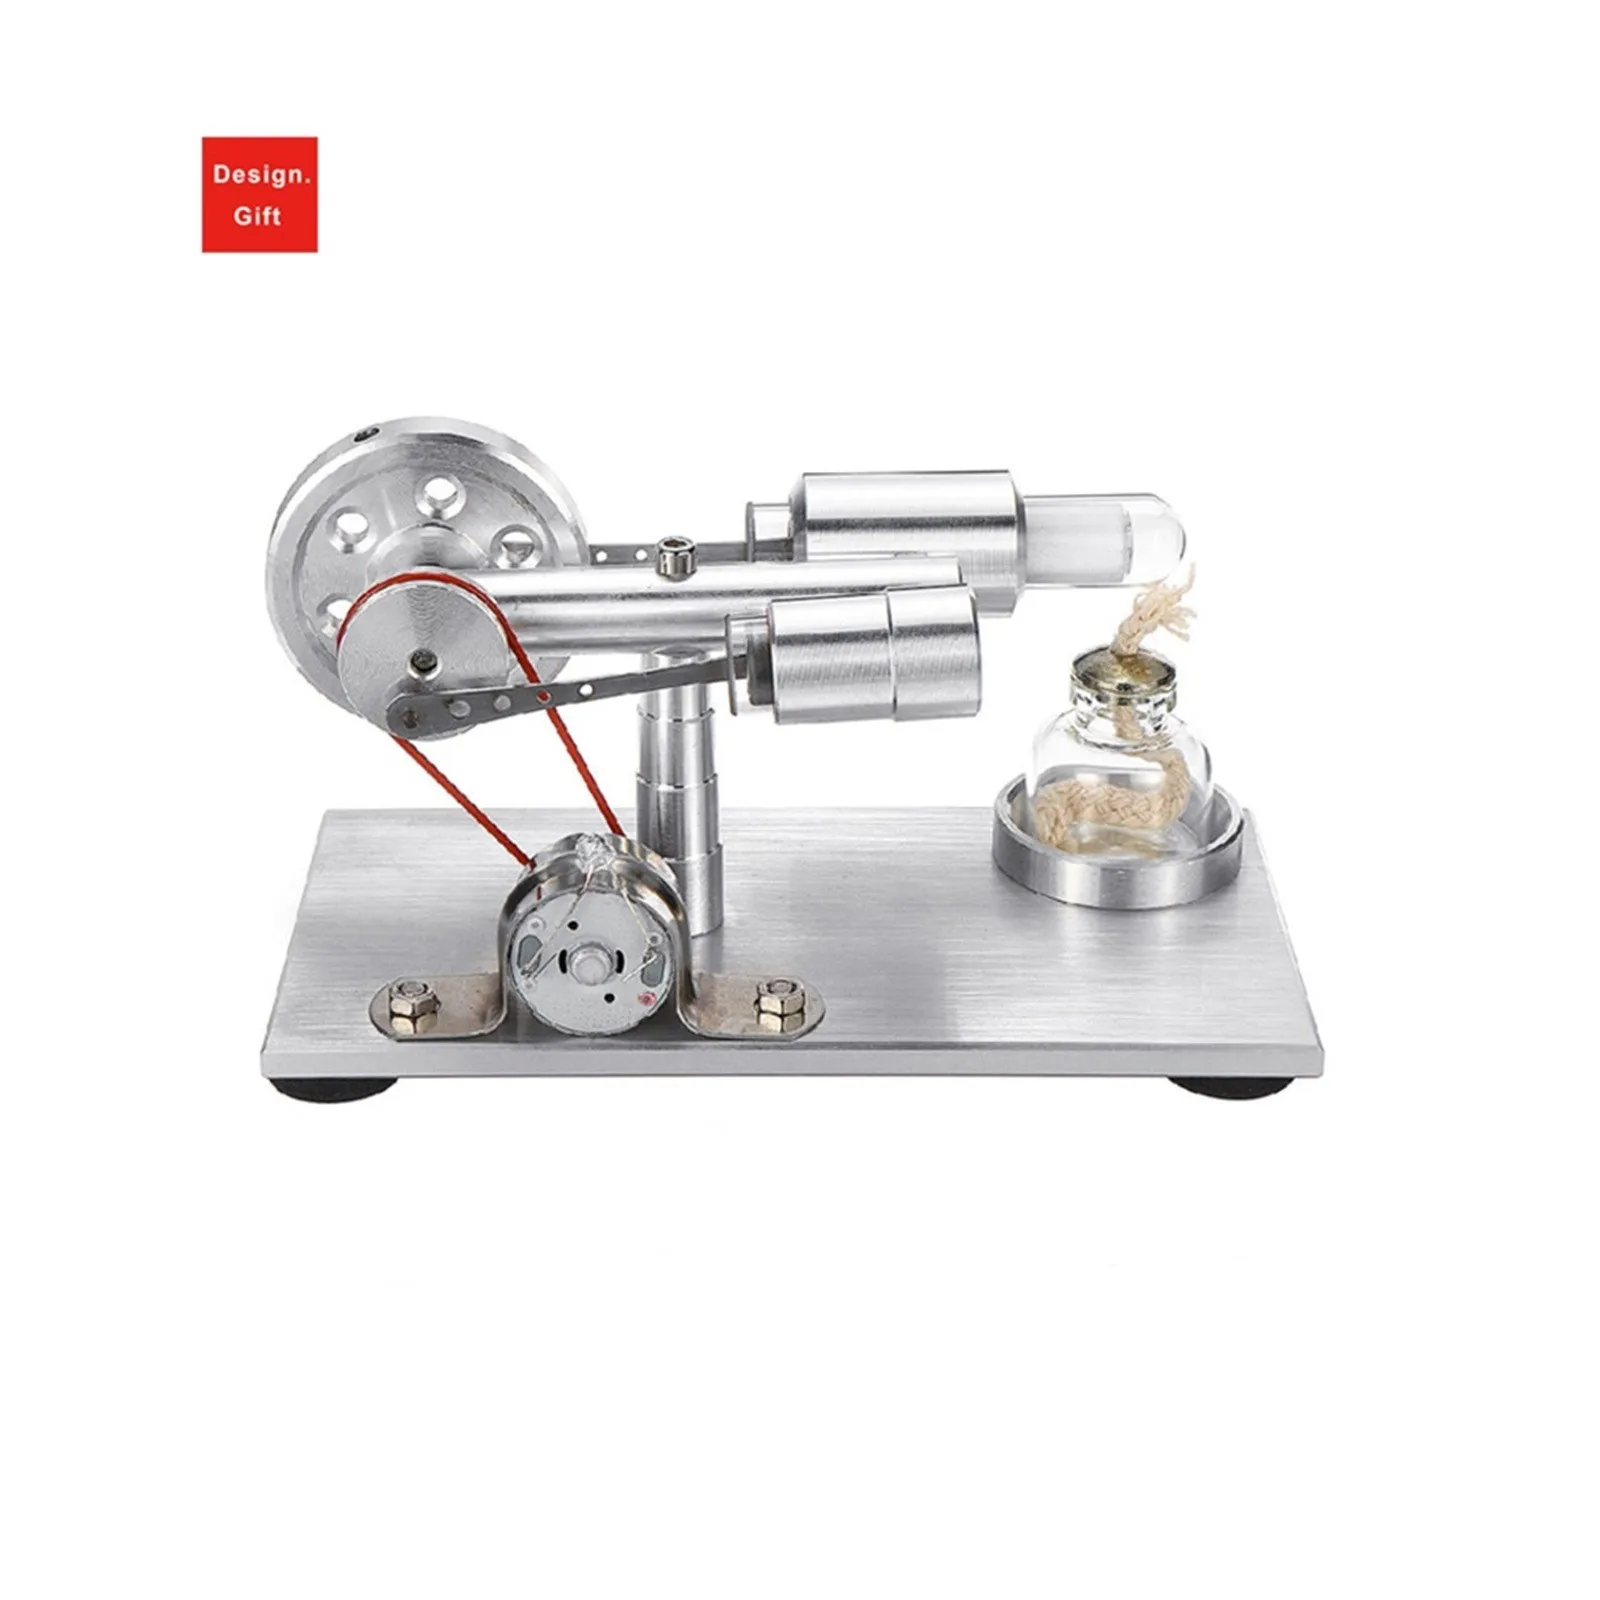 Hot Air Stirling Engine Education Toy Electricity Power School Experiment Toy 